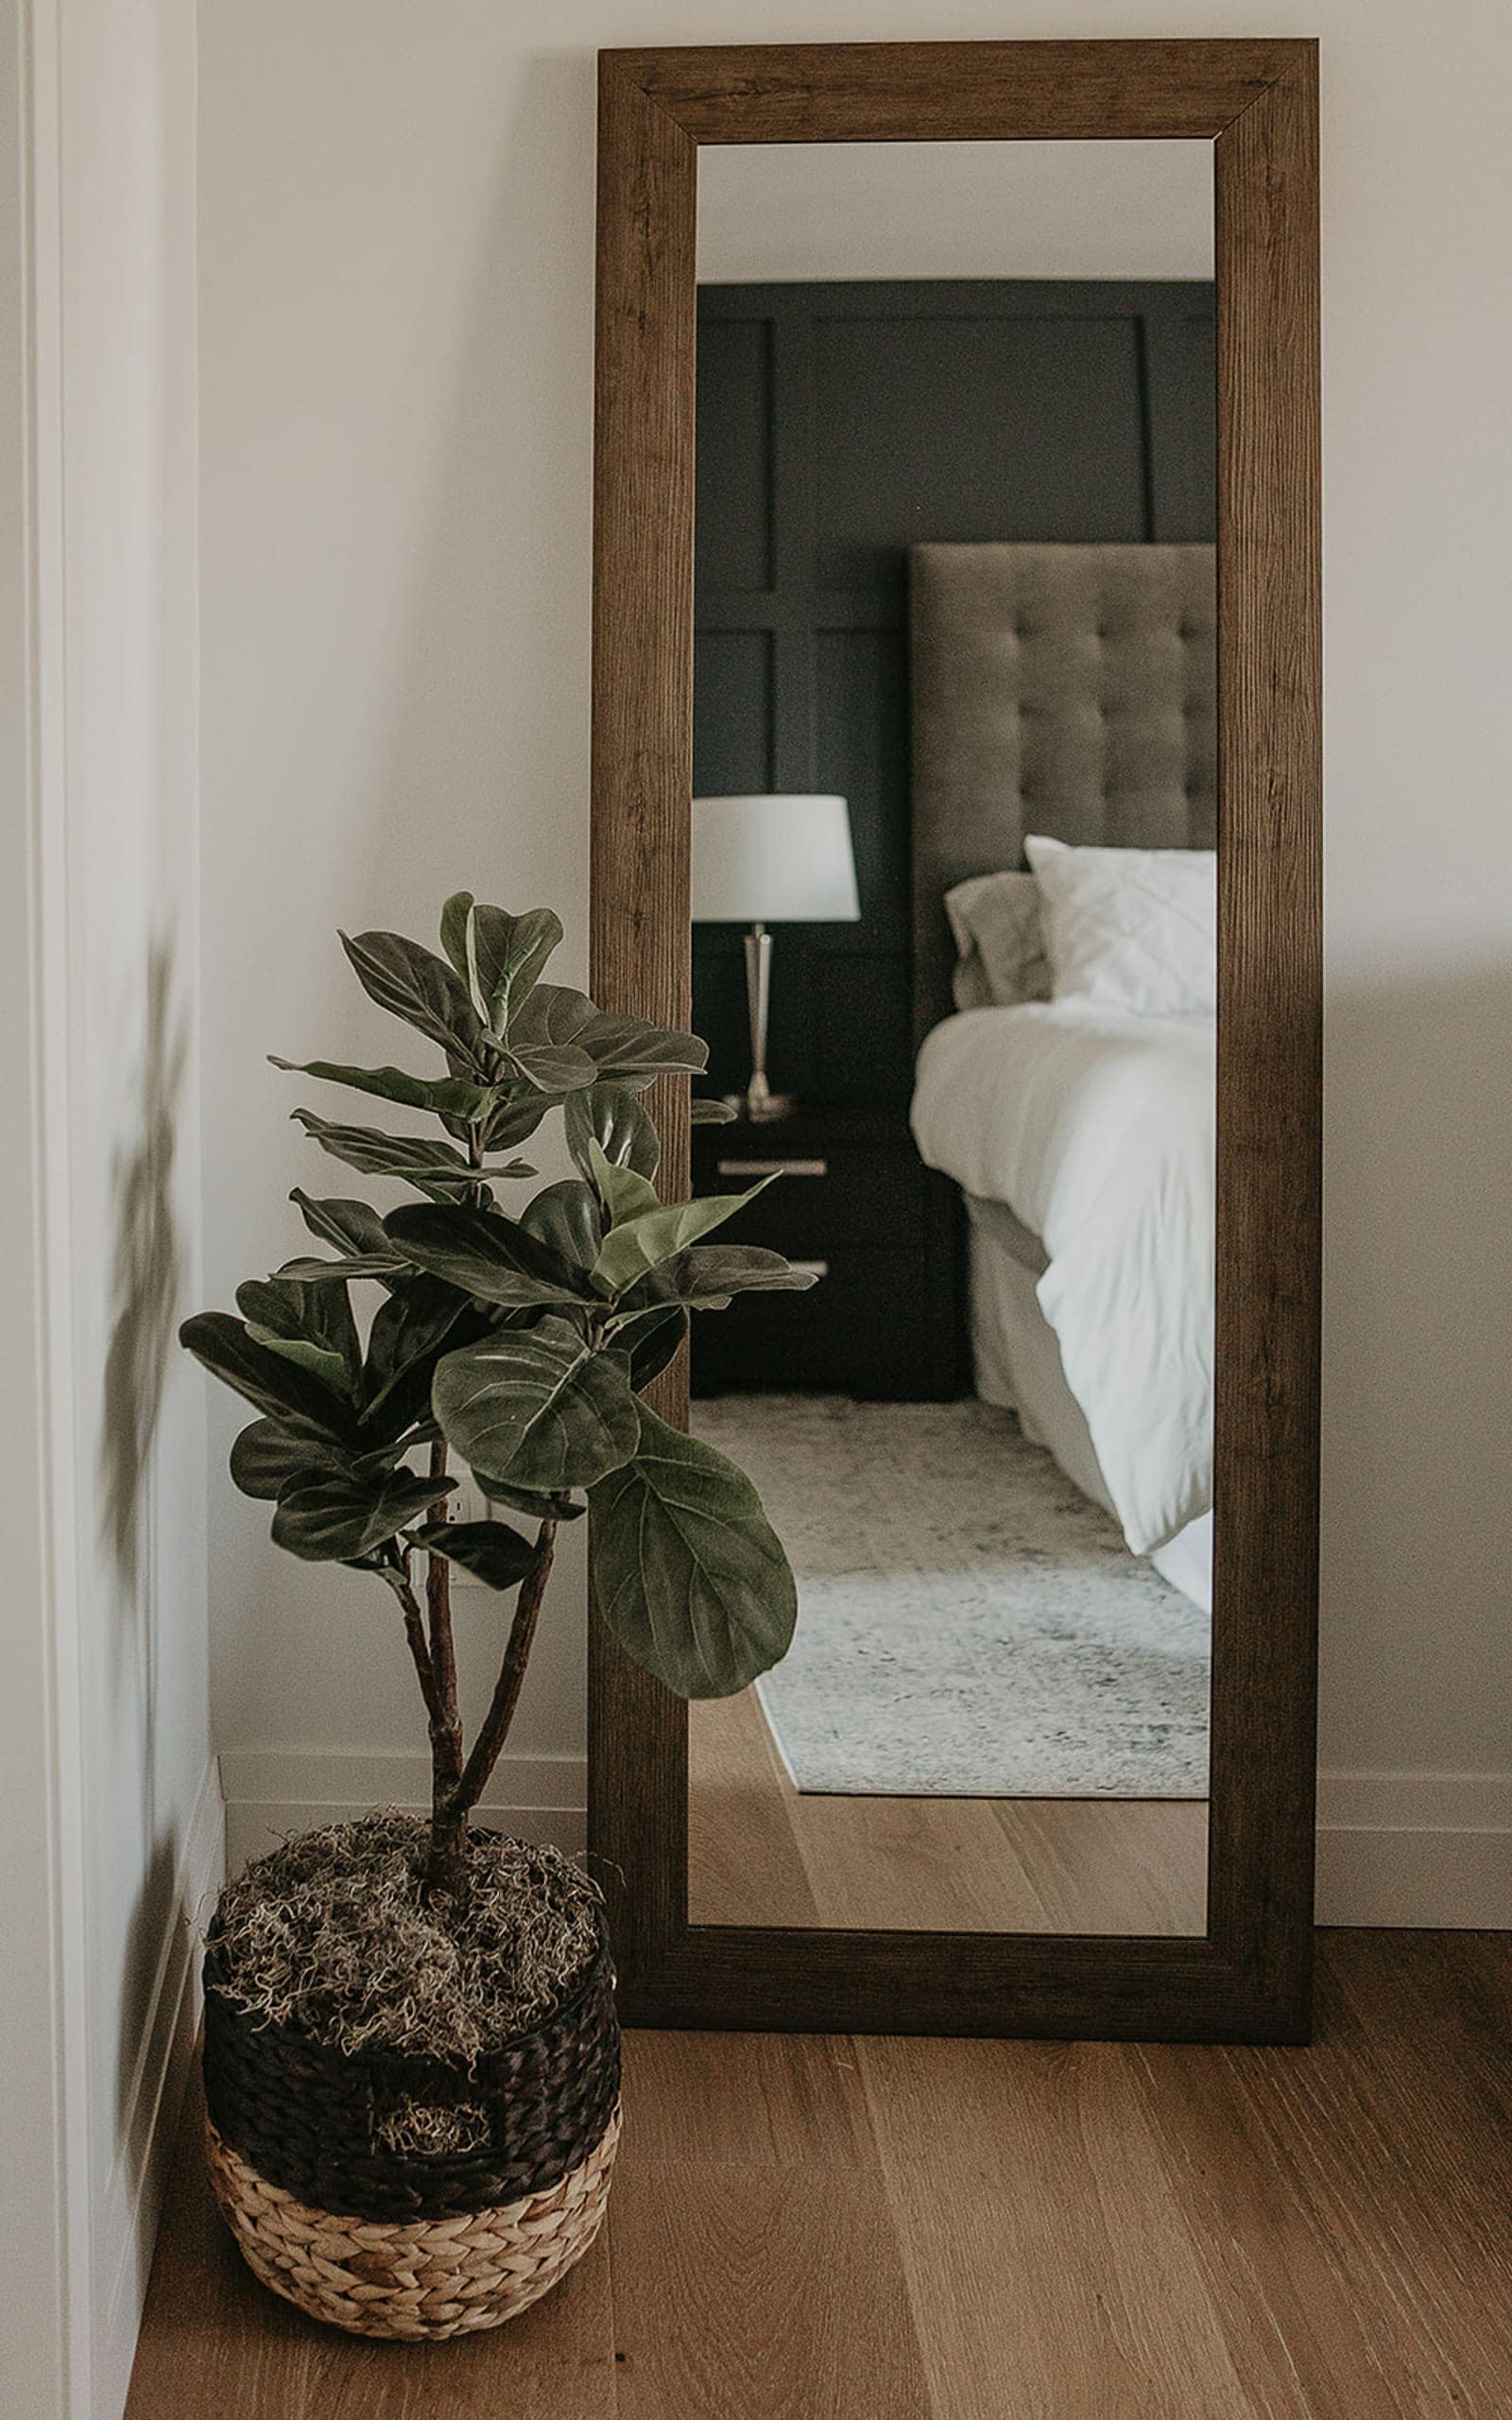 Wood mirror and plant